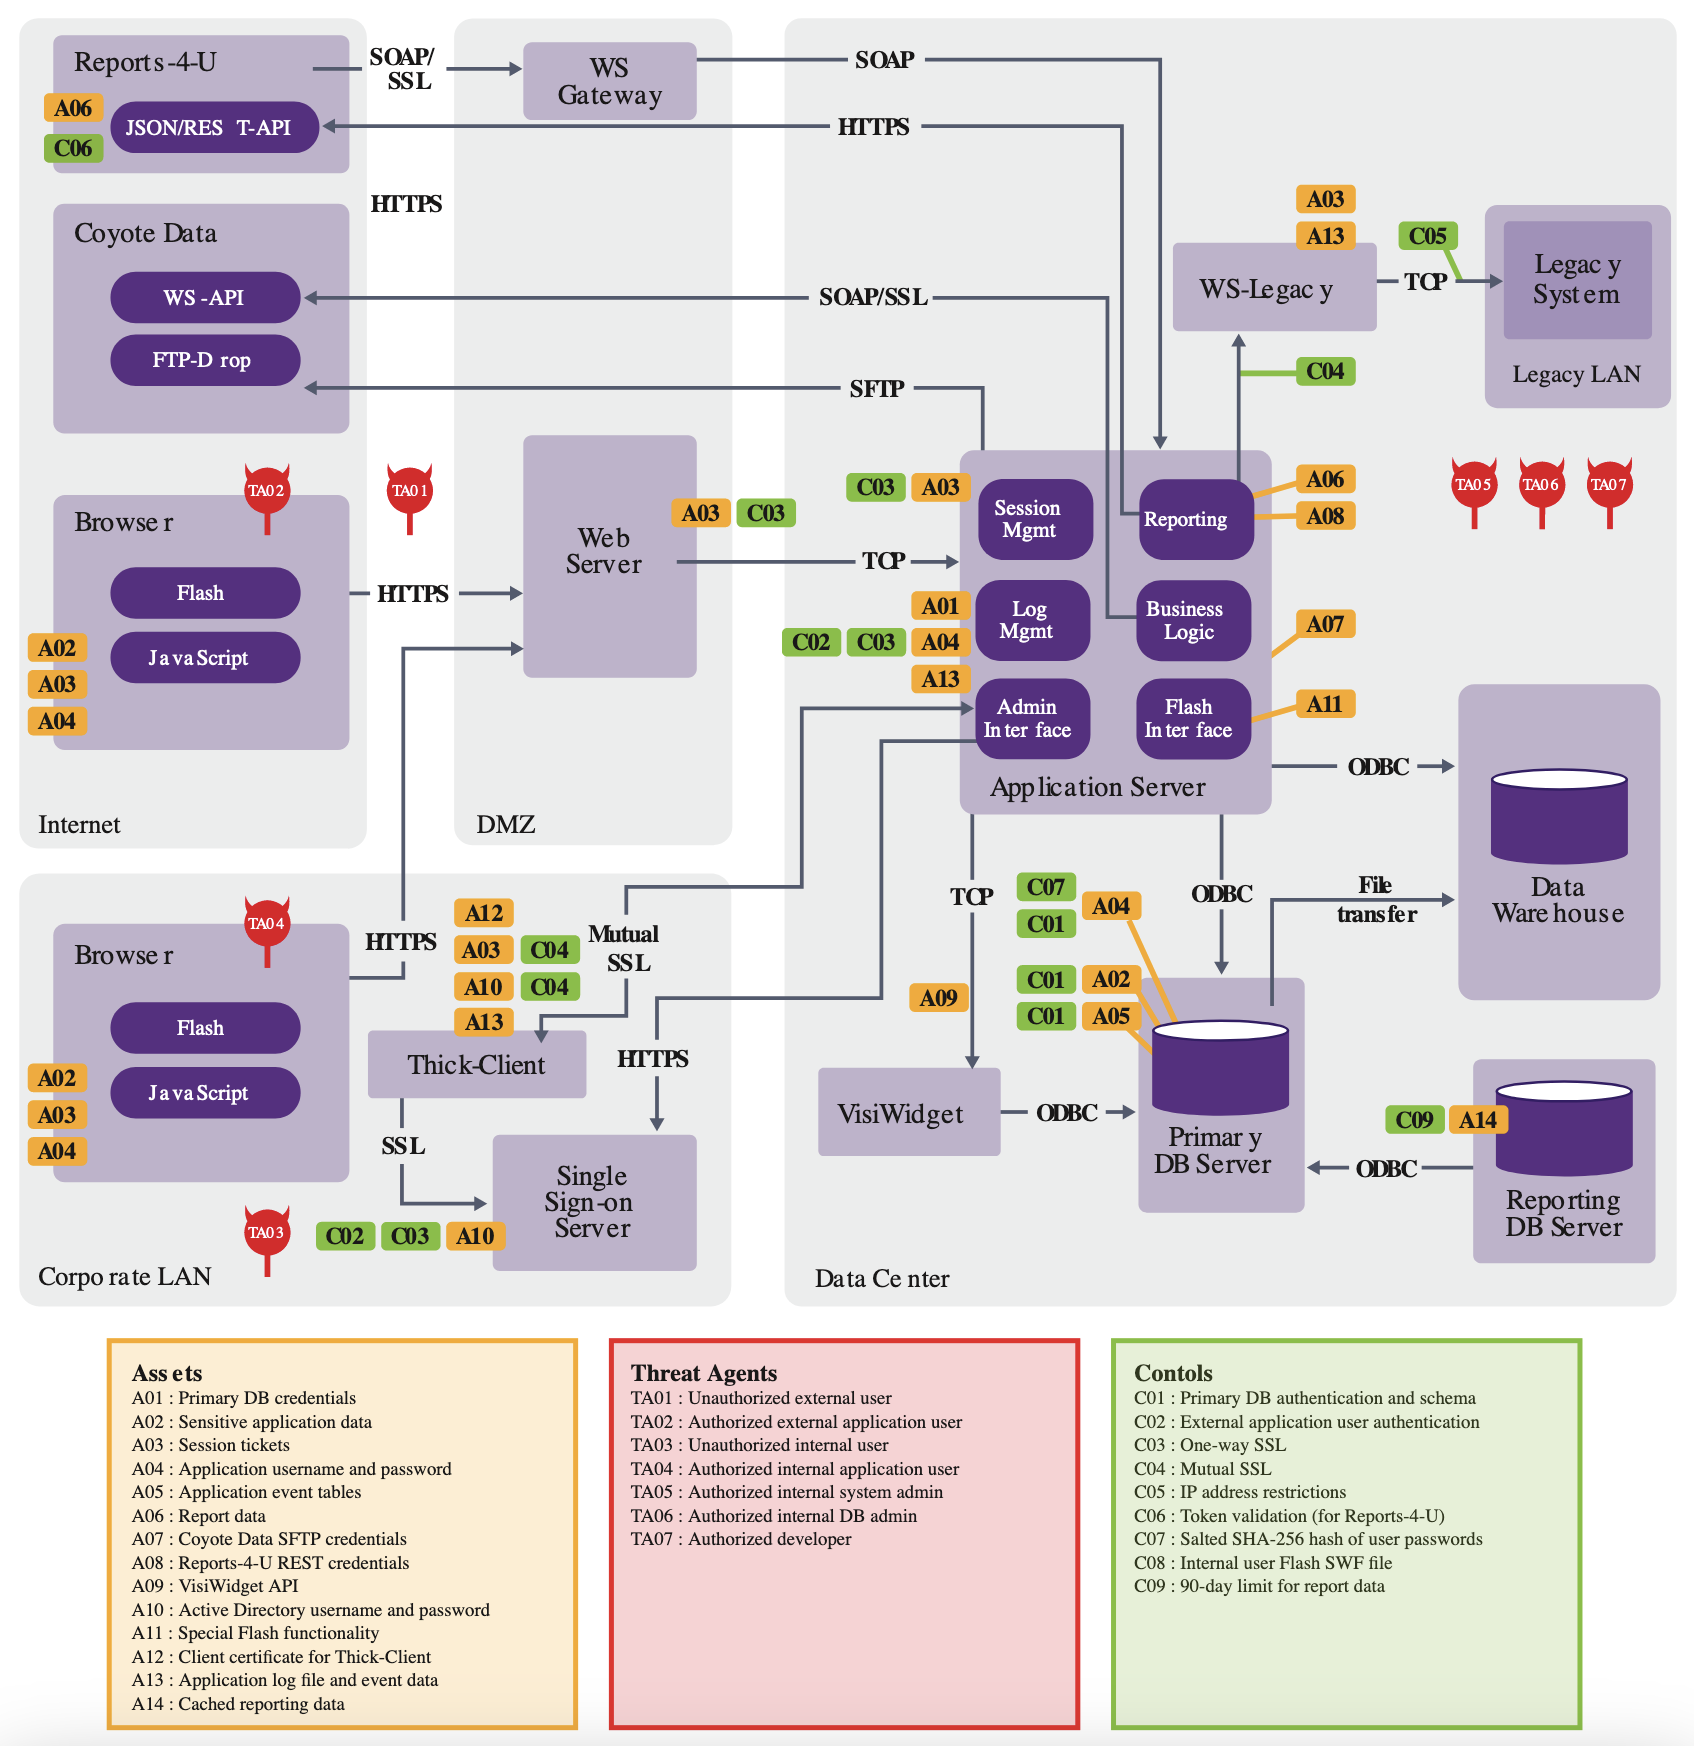 Threat model from Synopsys